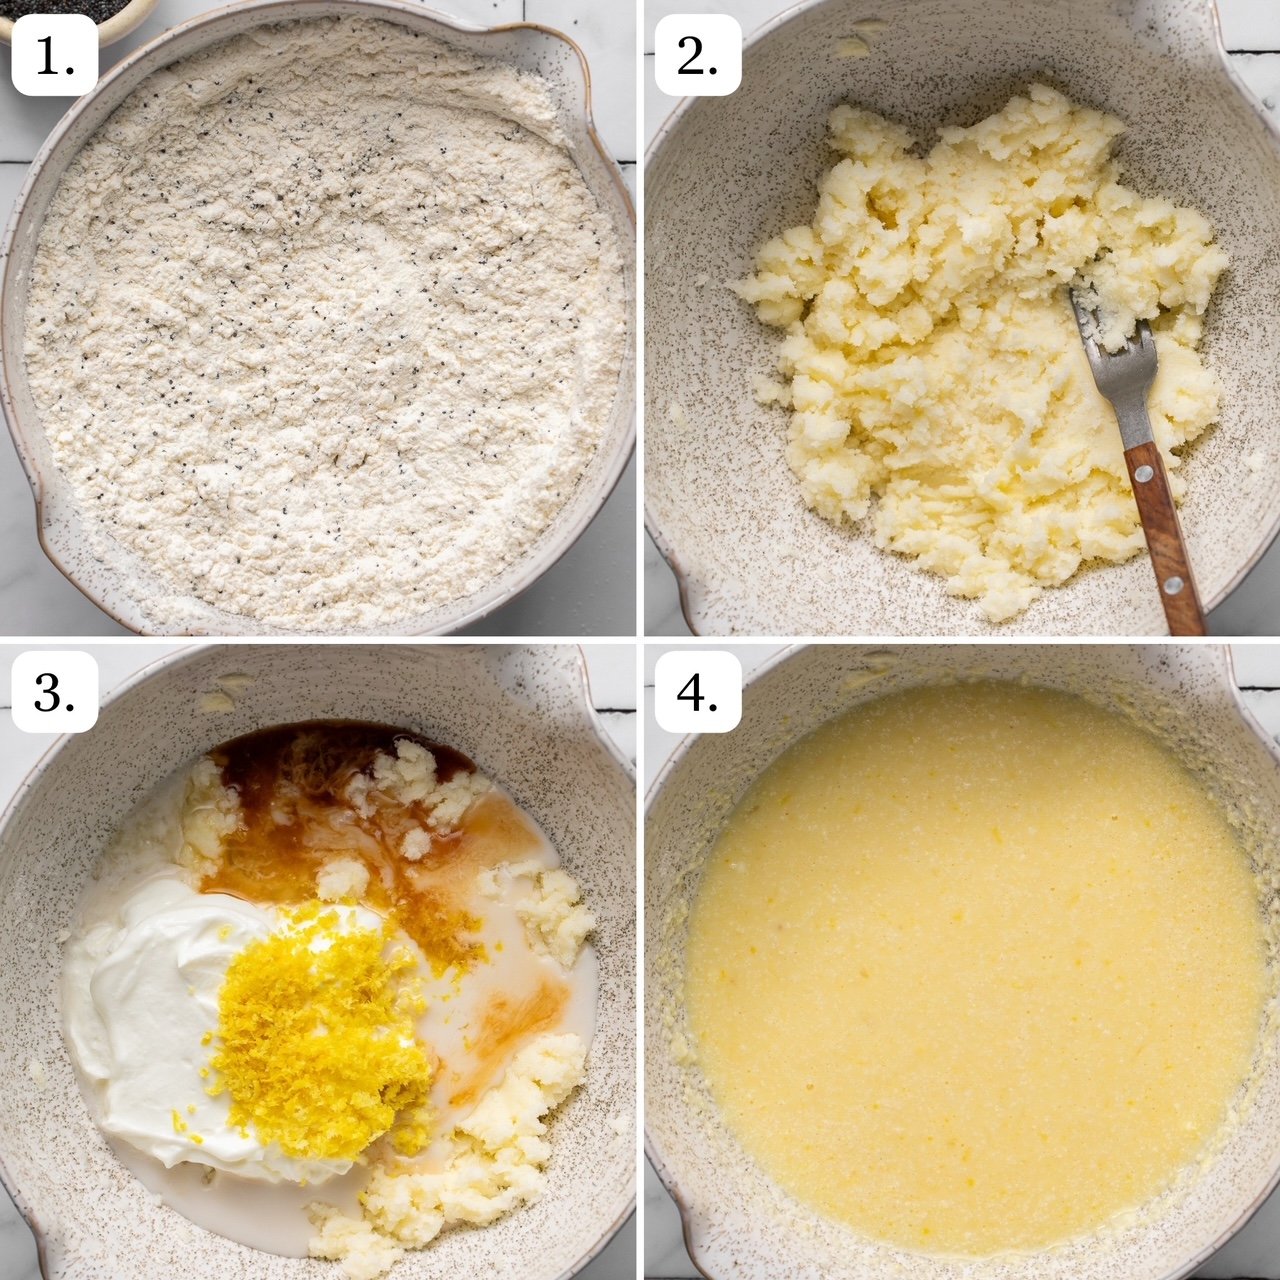 numbered step by step photos showing how to make the muffin batter